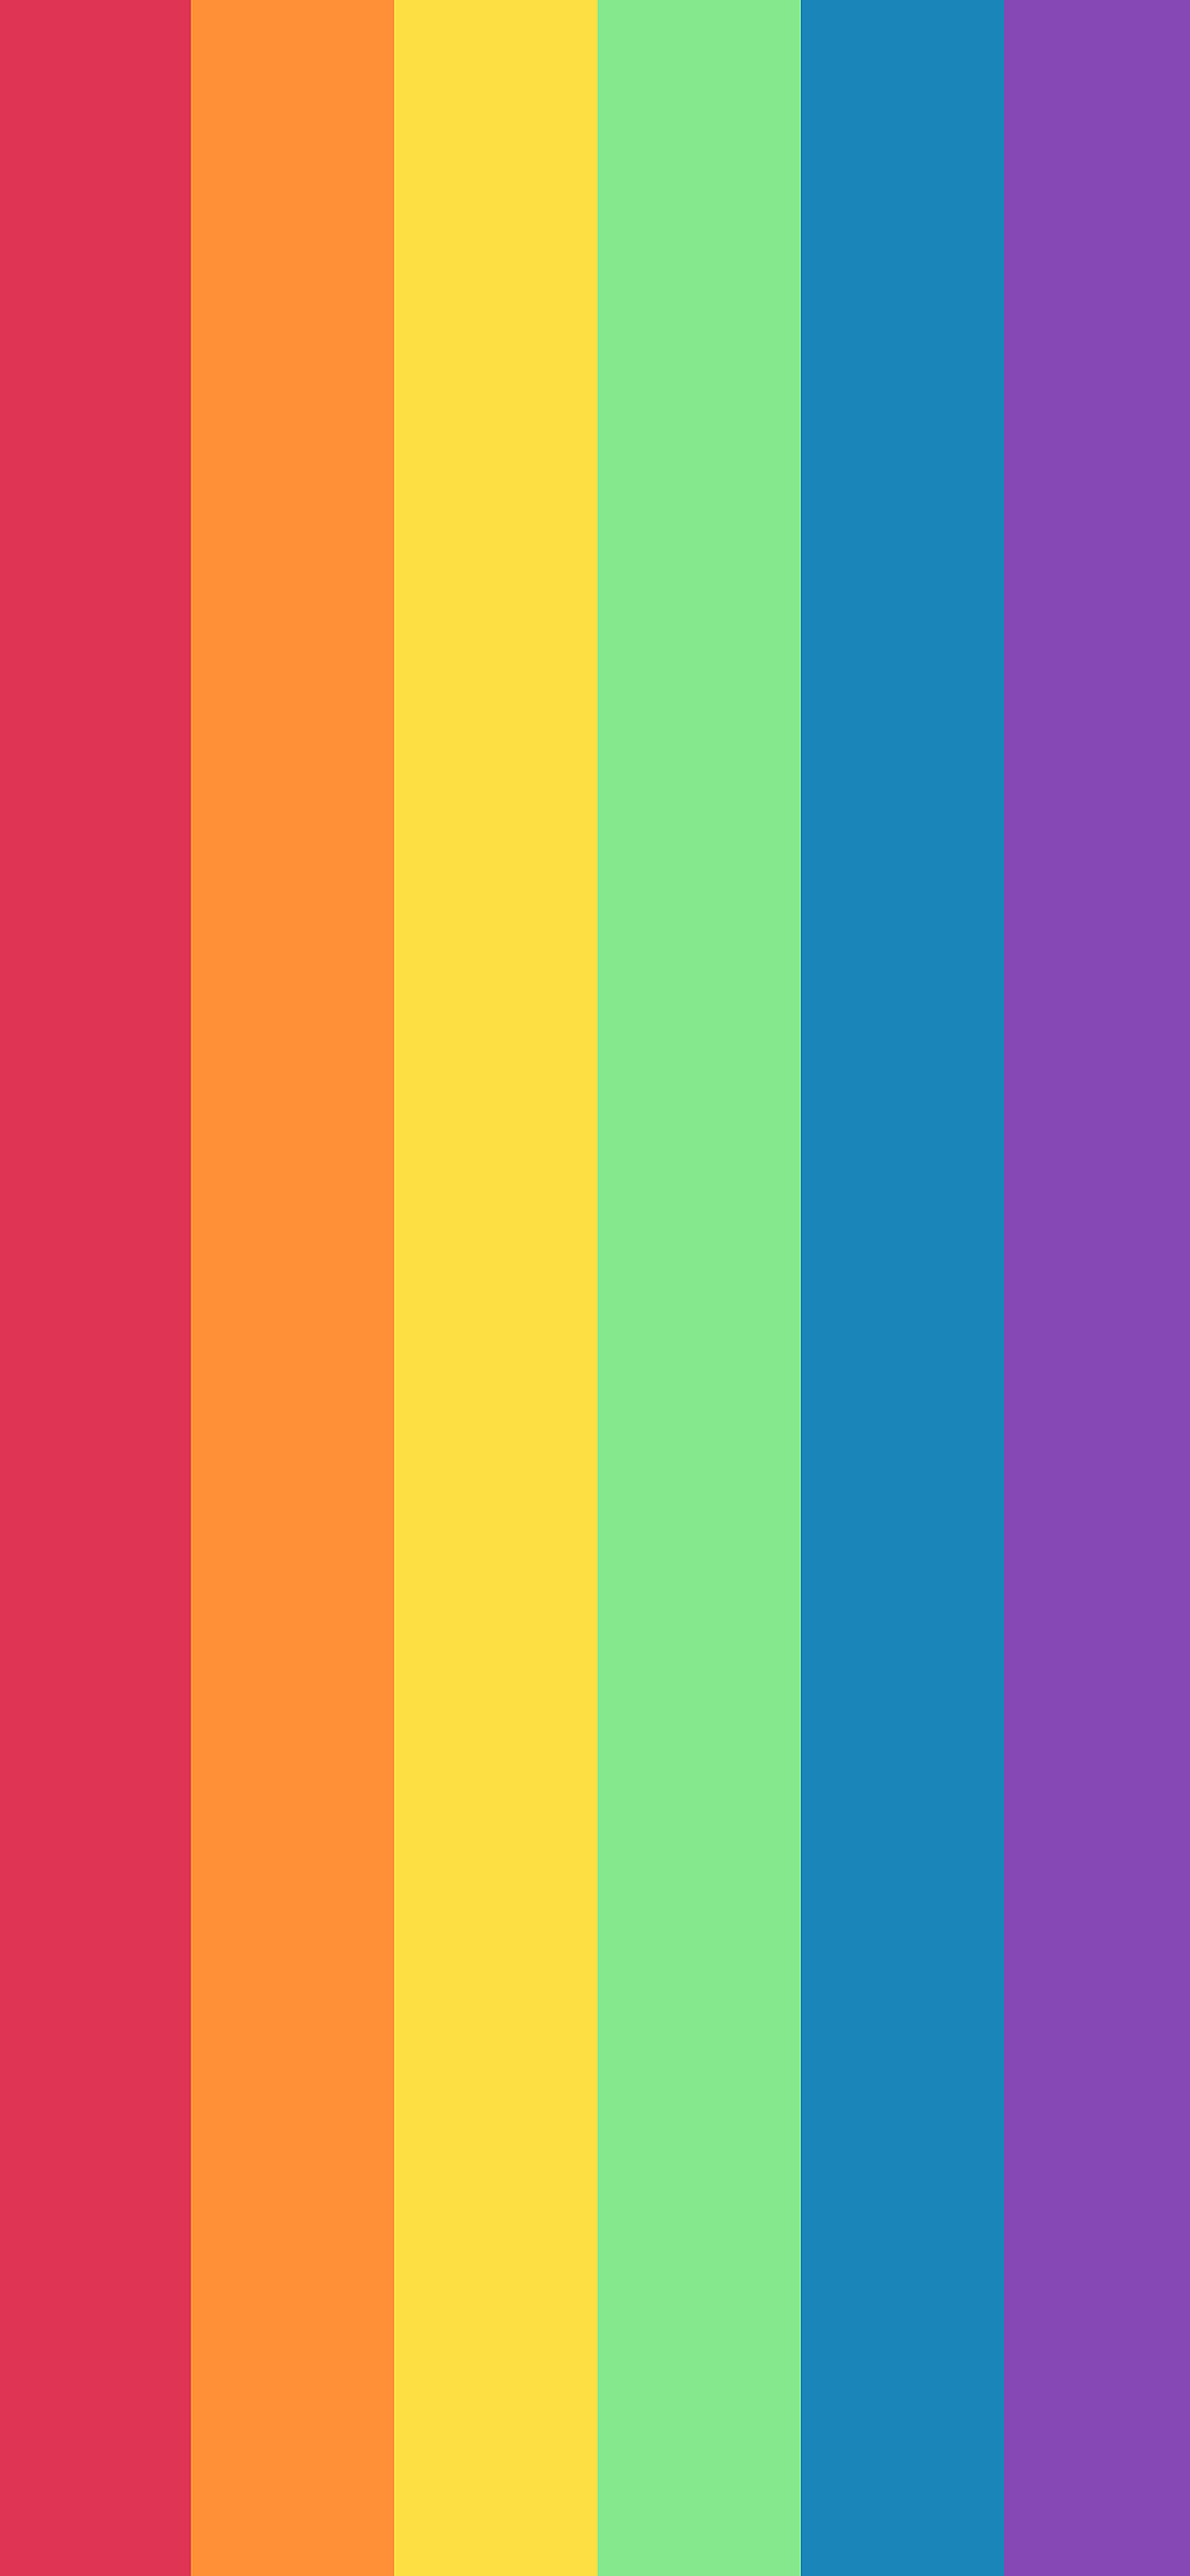 1242x2688 Apple Pride 2020 inspired wallpapers for iPhone